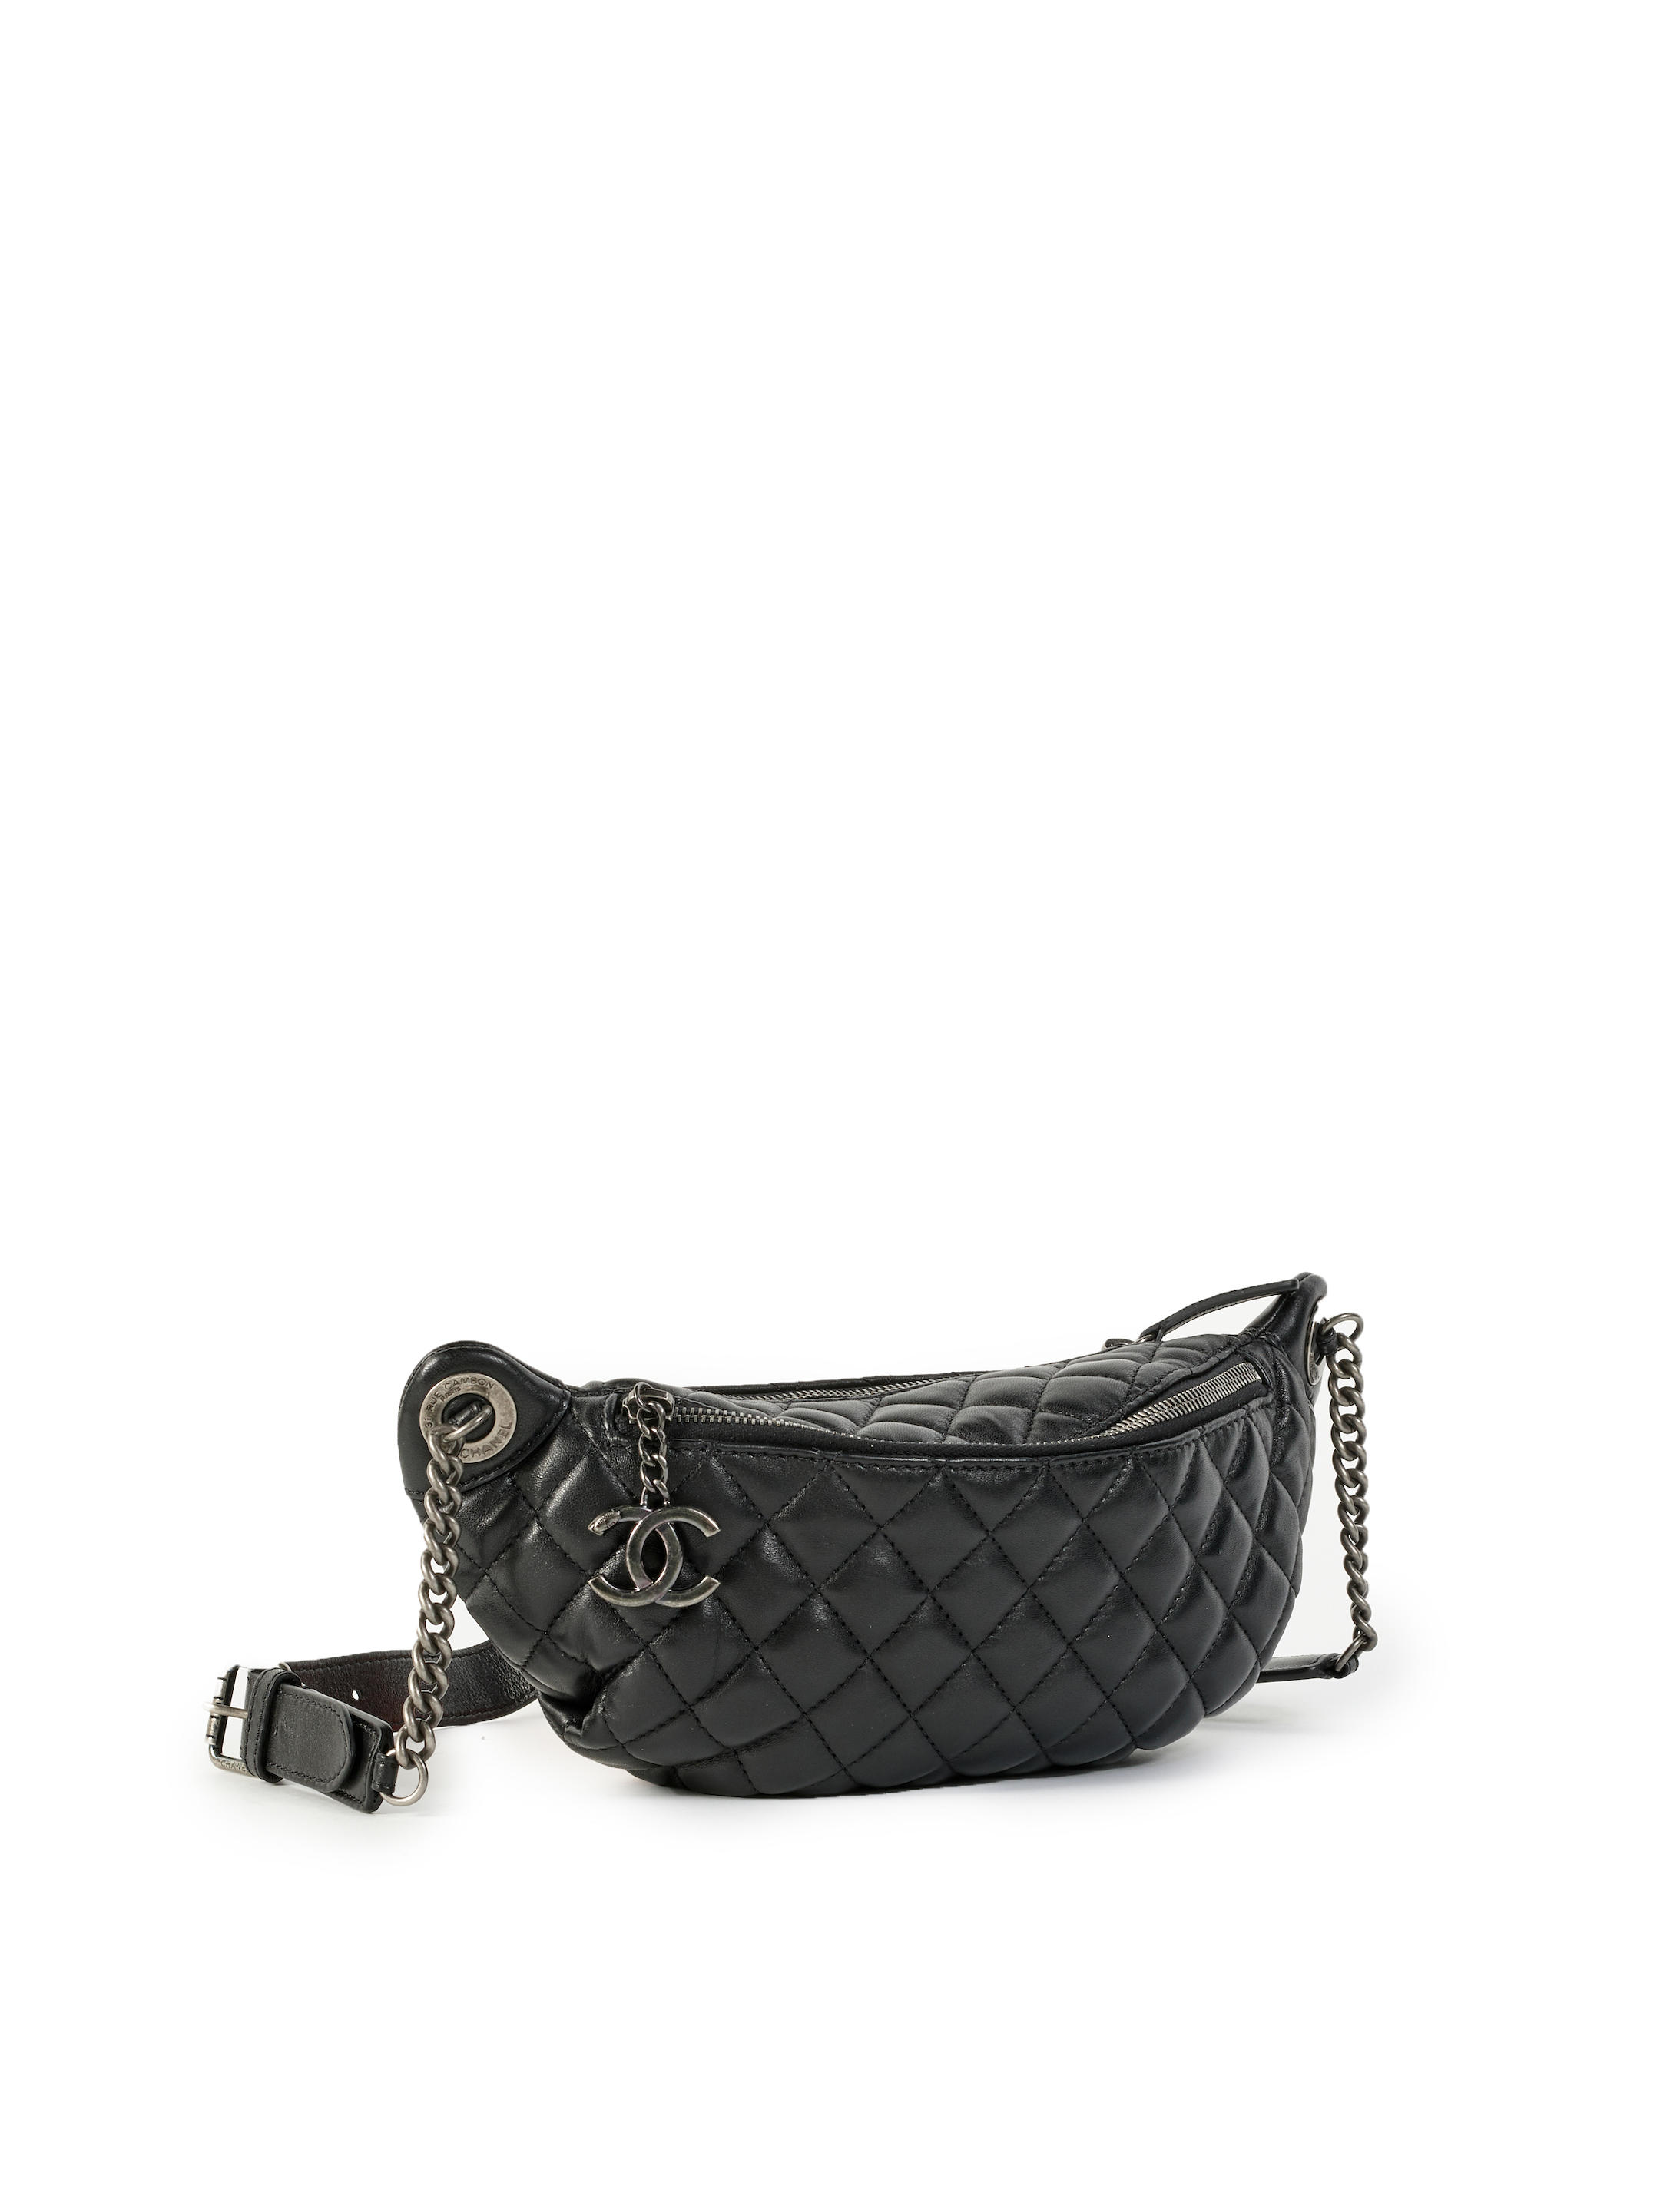 Chanel Black Lambskin Gold Hardware Logo Cc Quilted Camera